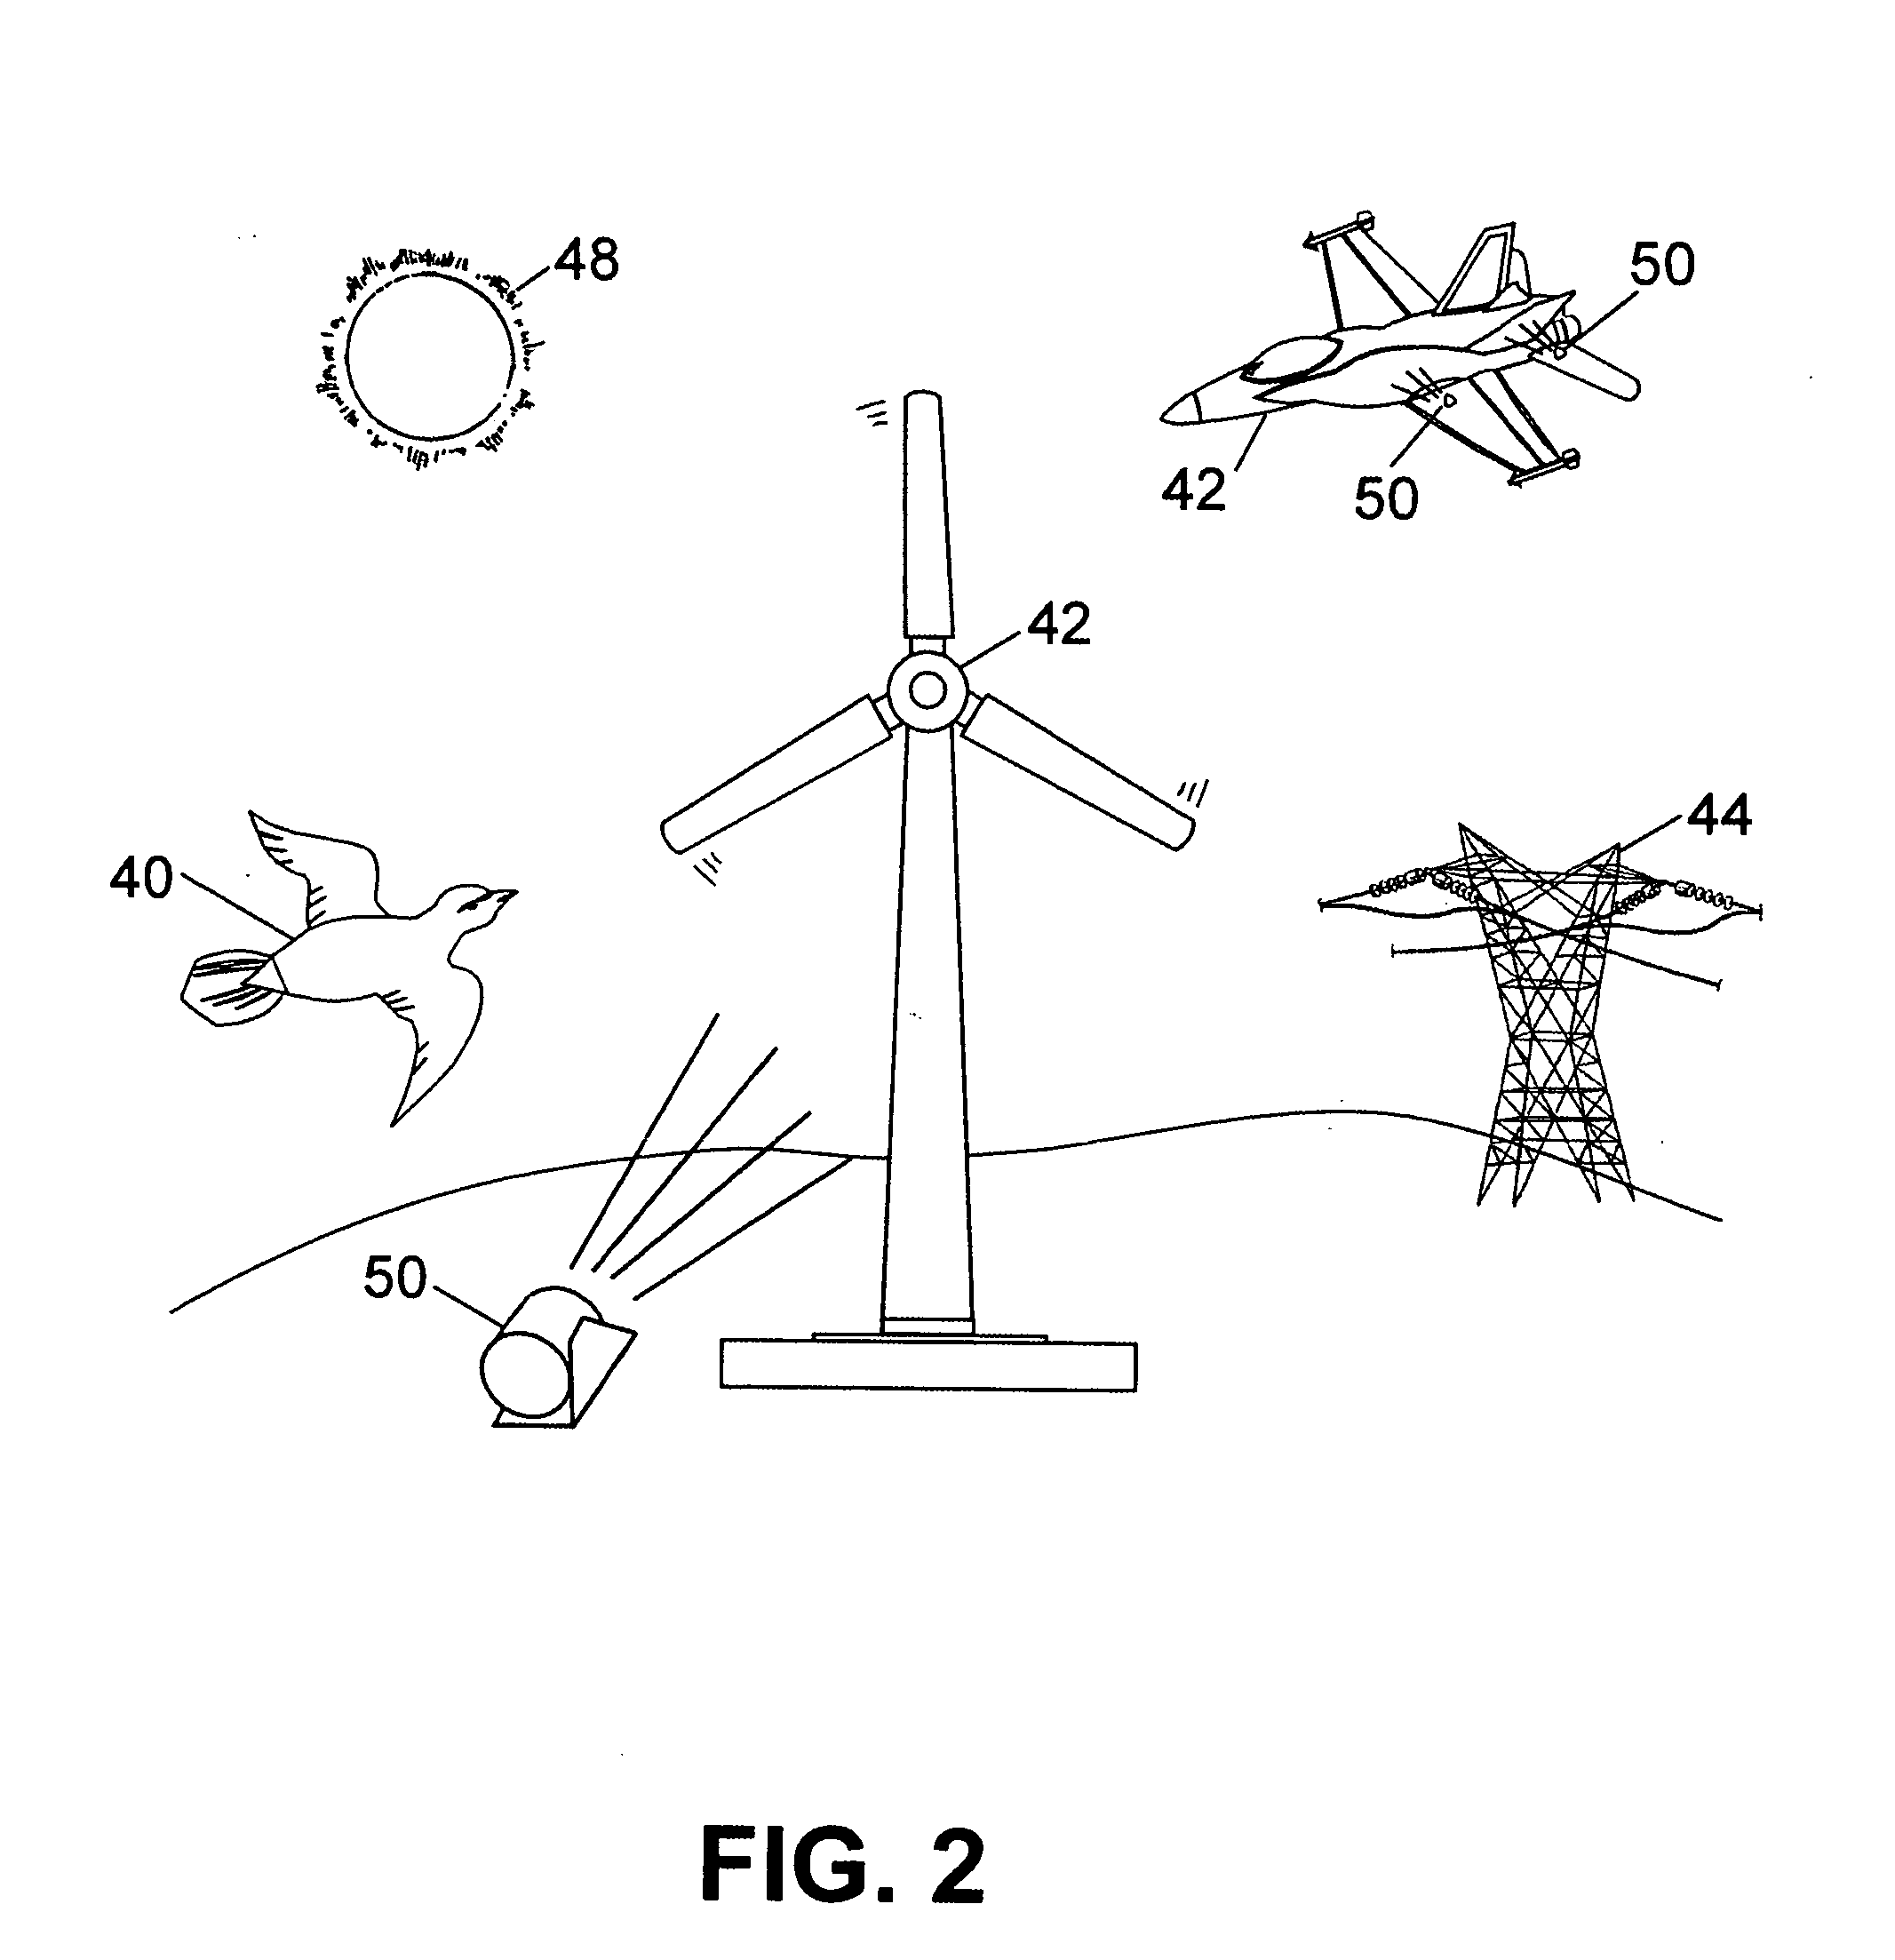 System for controlling the interaction of animals and objects